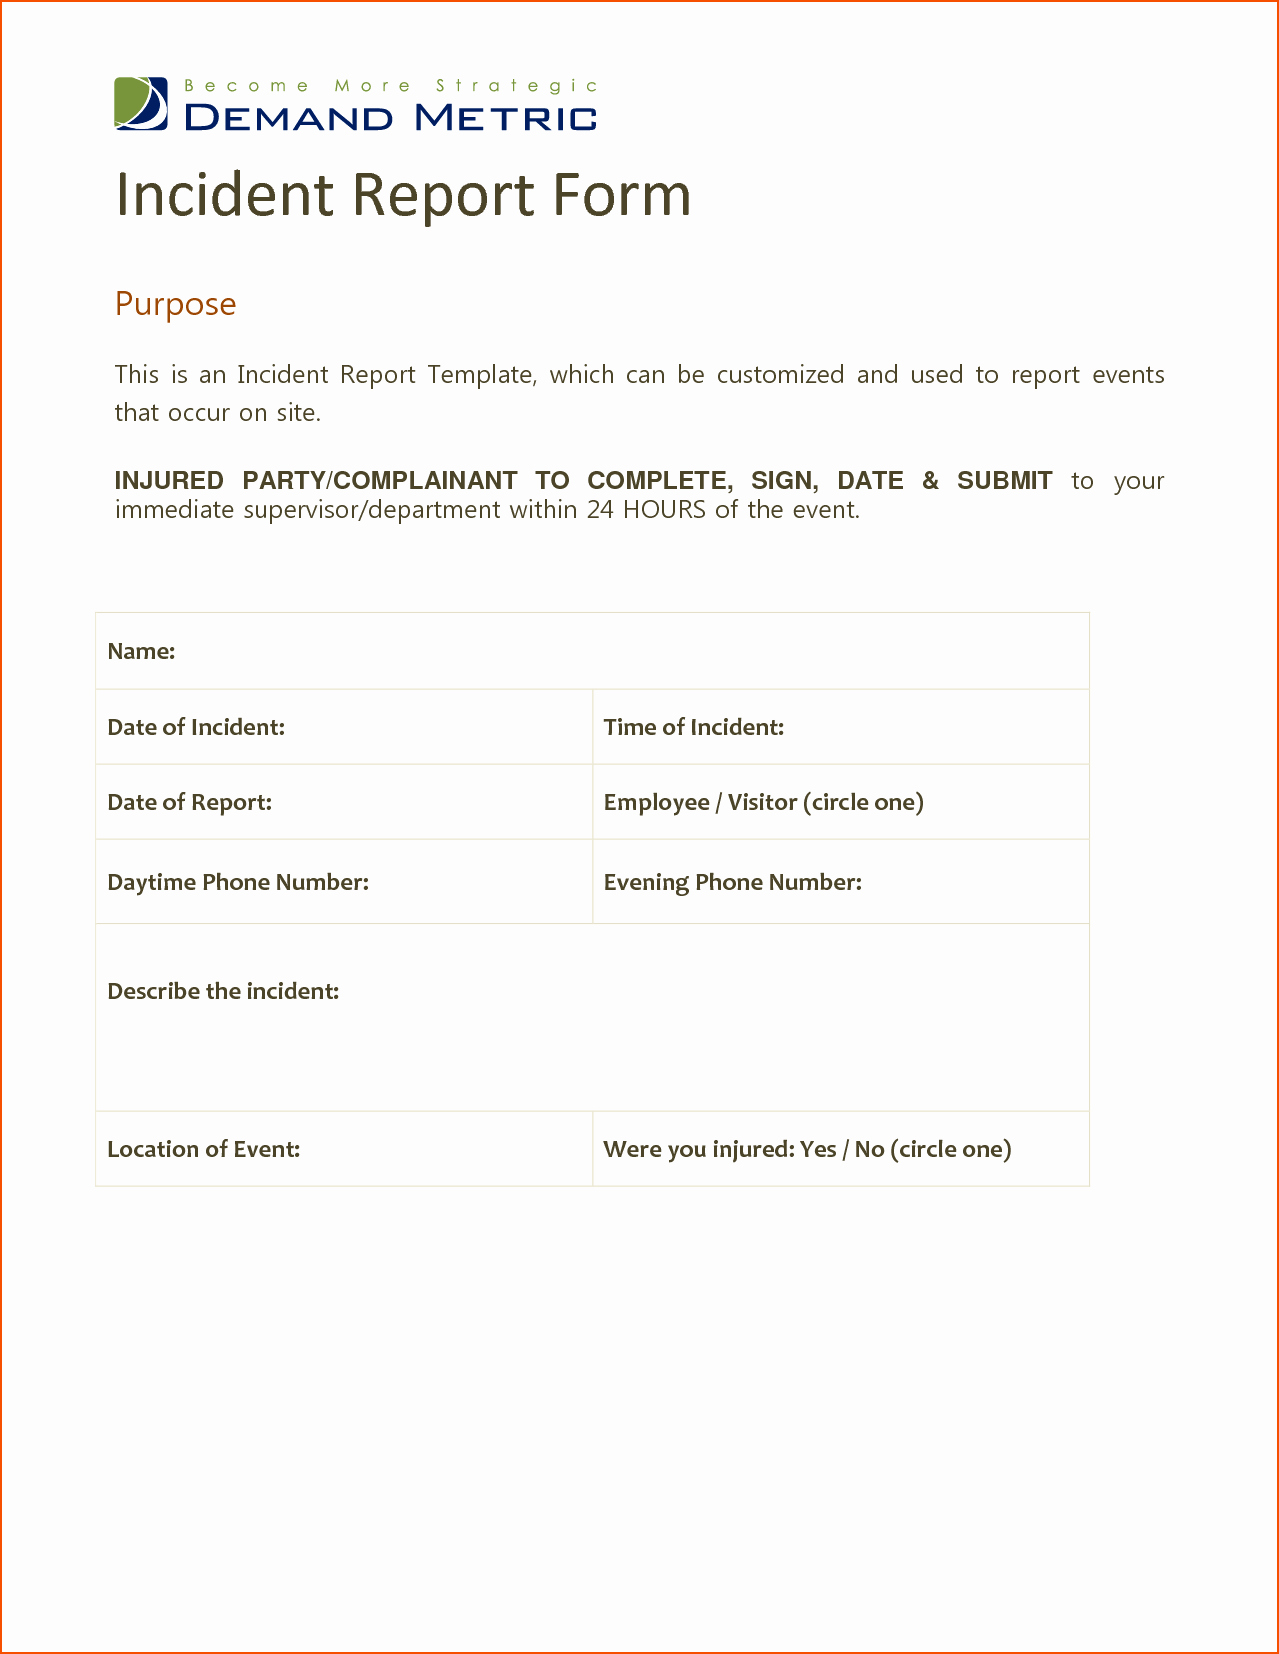 Incident Report Template Microsoft Beautiful Technical Writing Incident Report Sample Buy Research